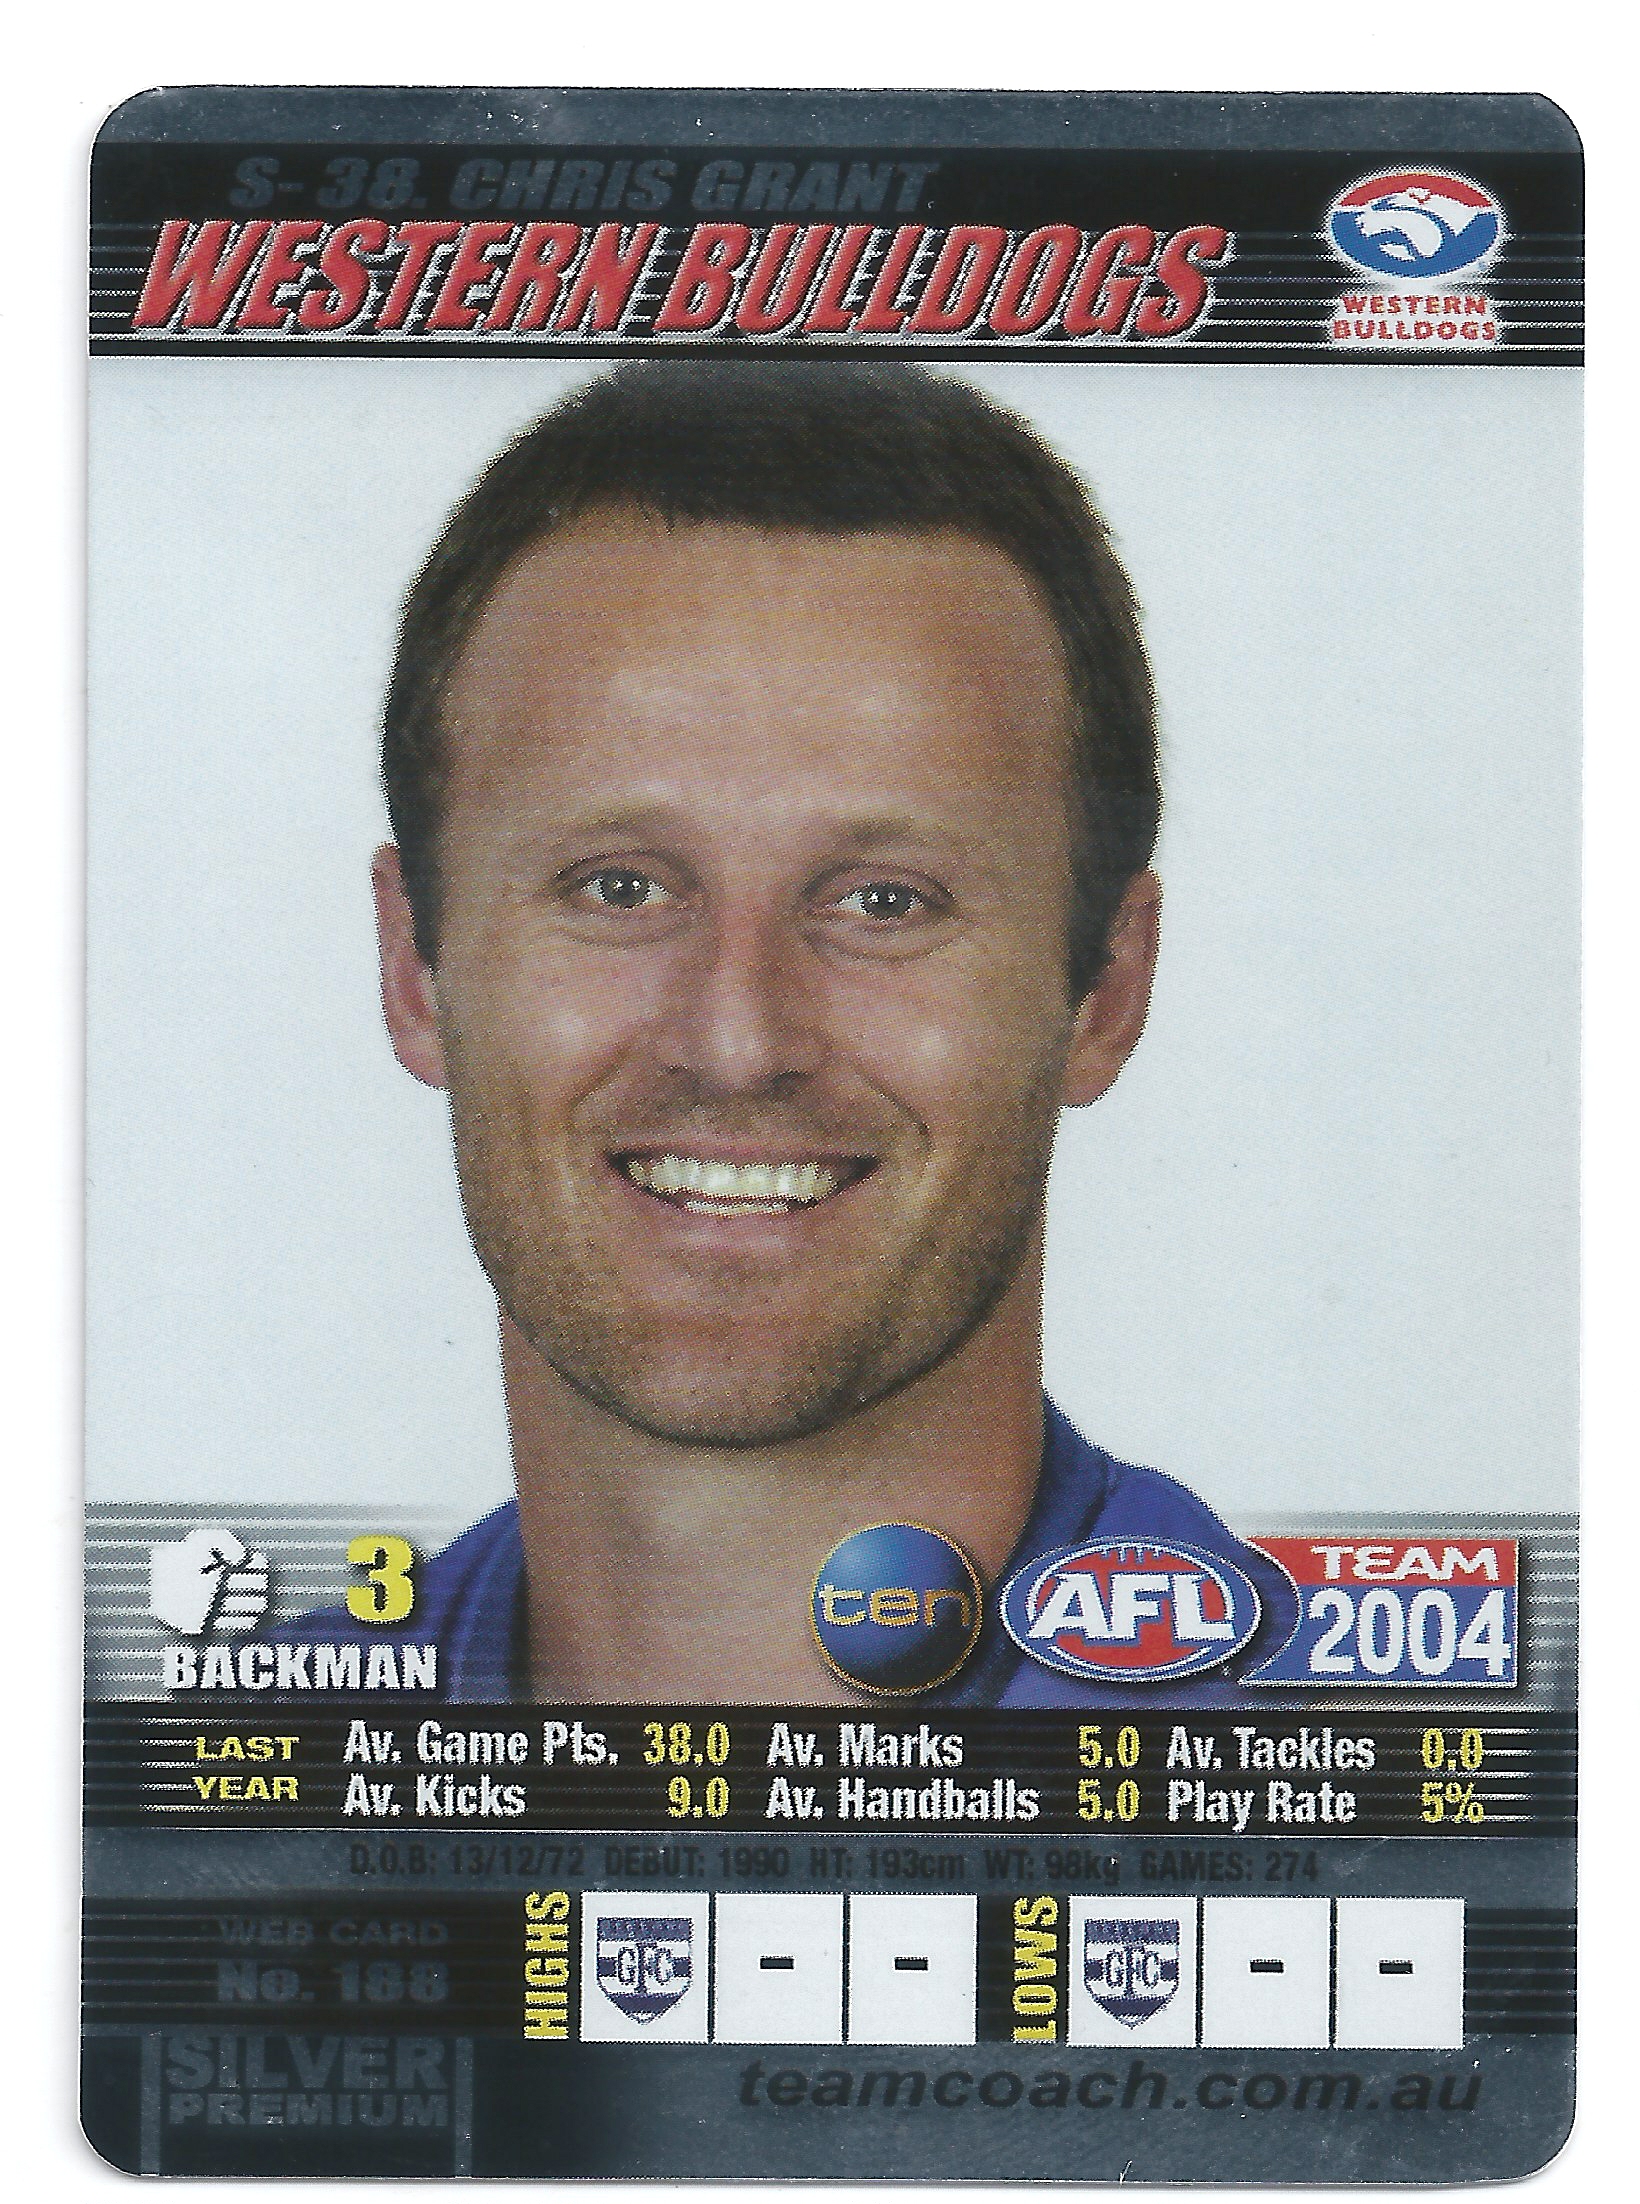 2004 Teamcoach Silver (S-38) Chris Grant Western Bulldogs